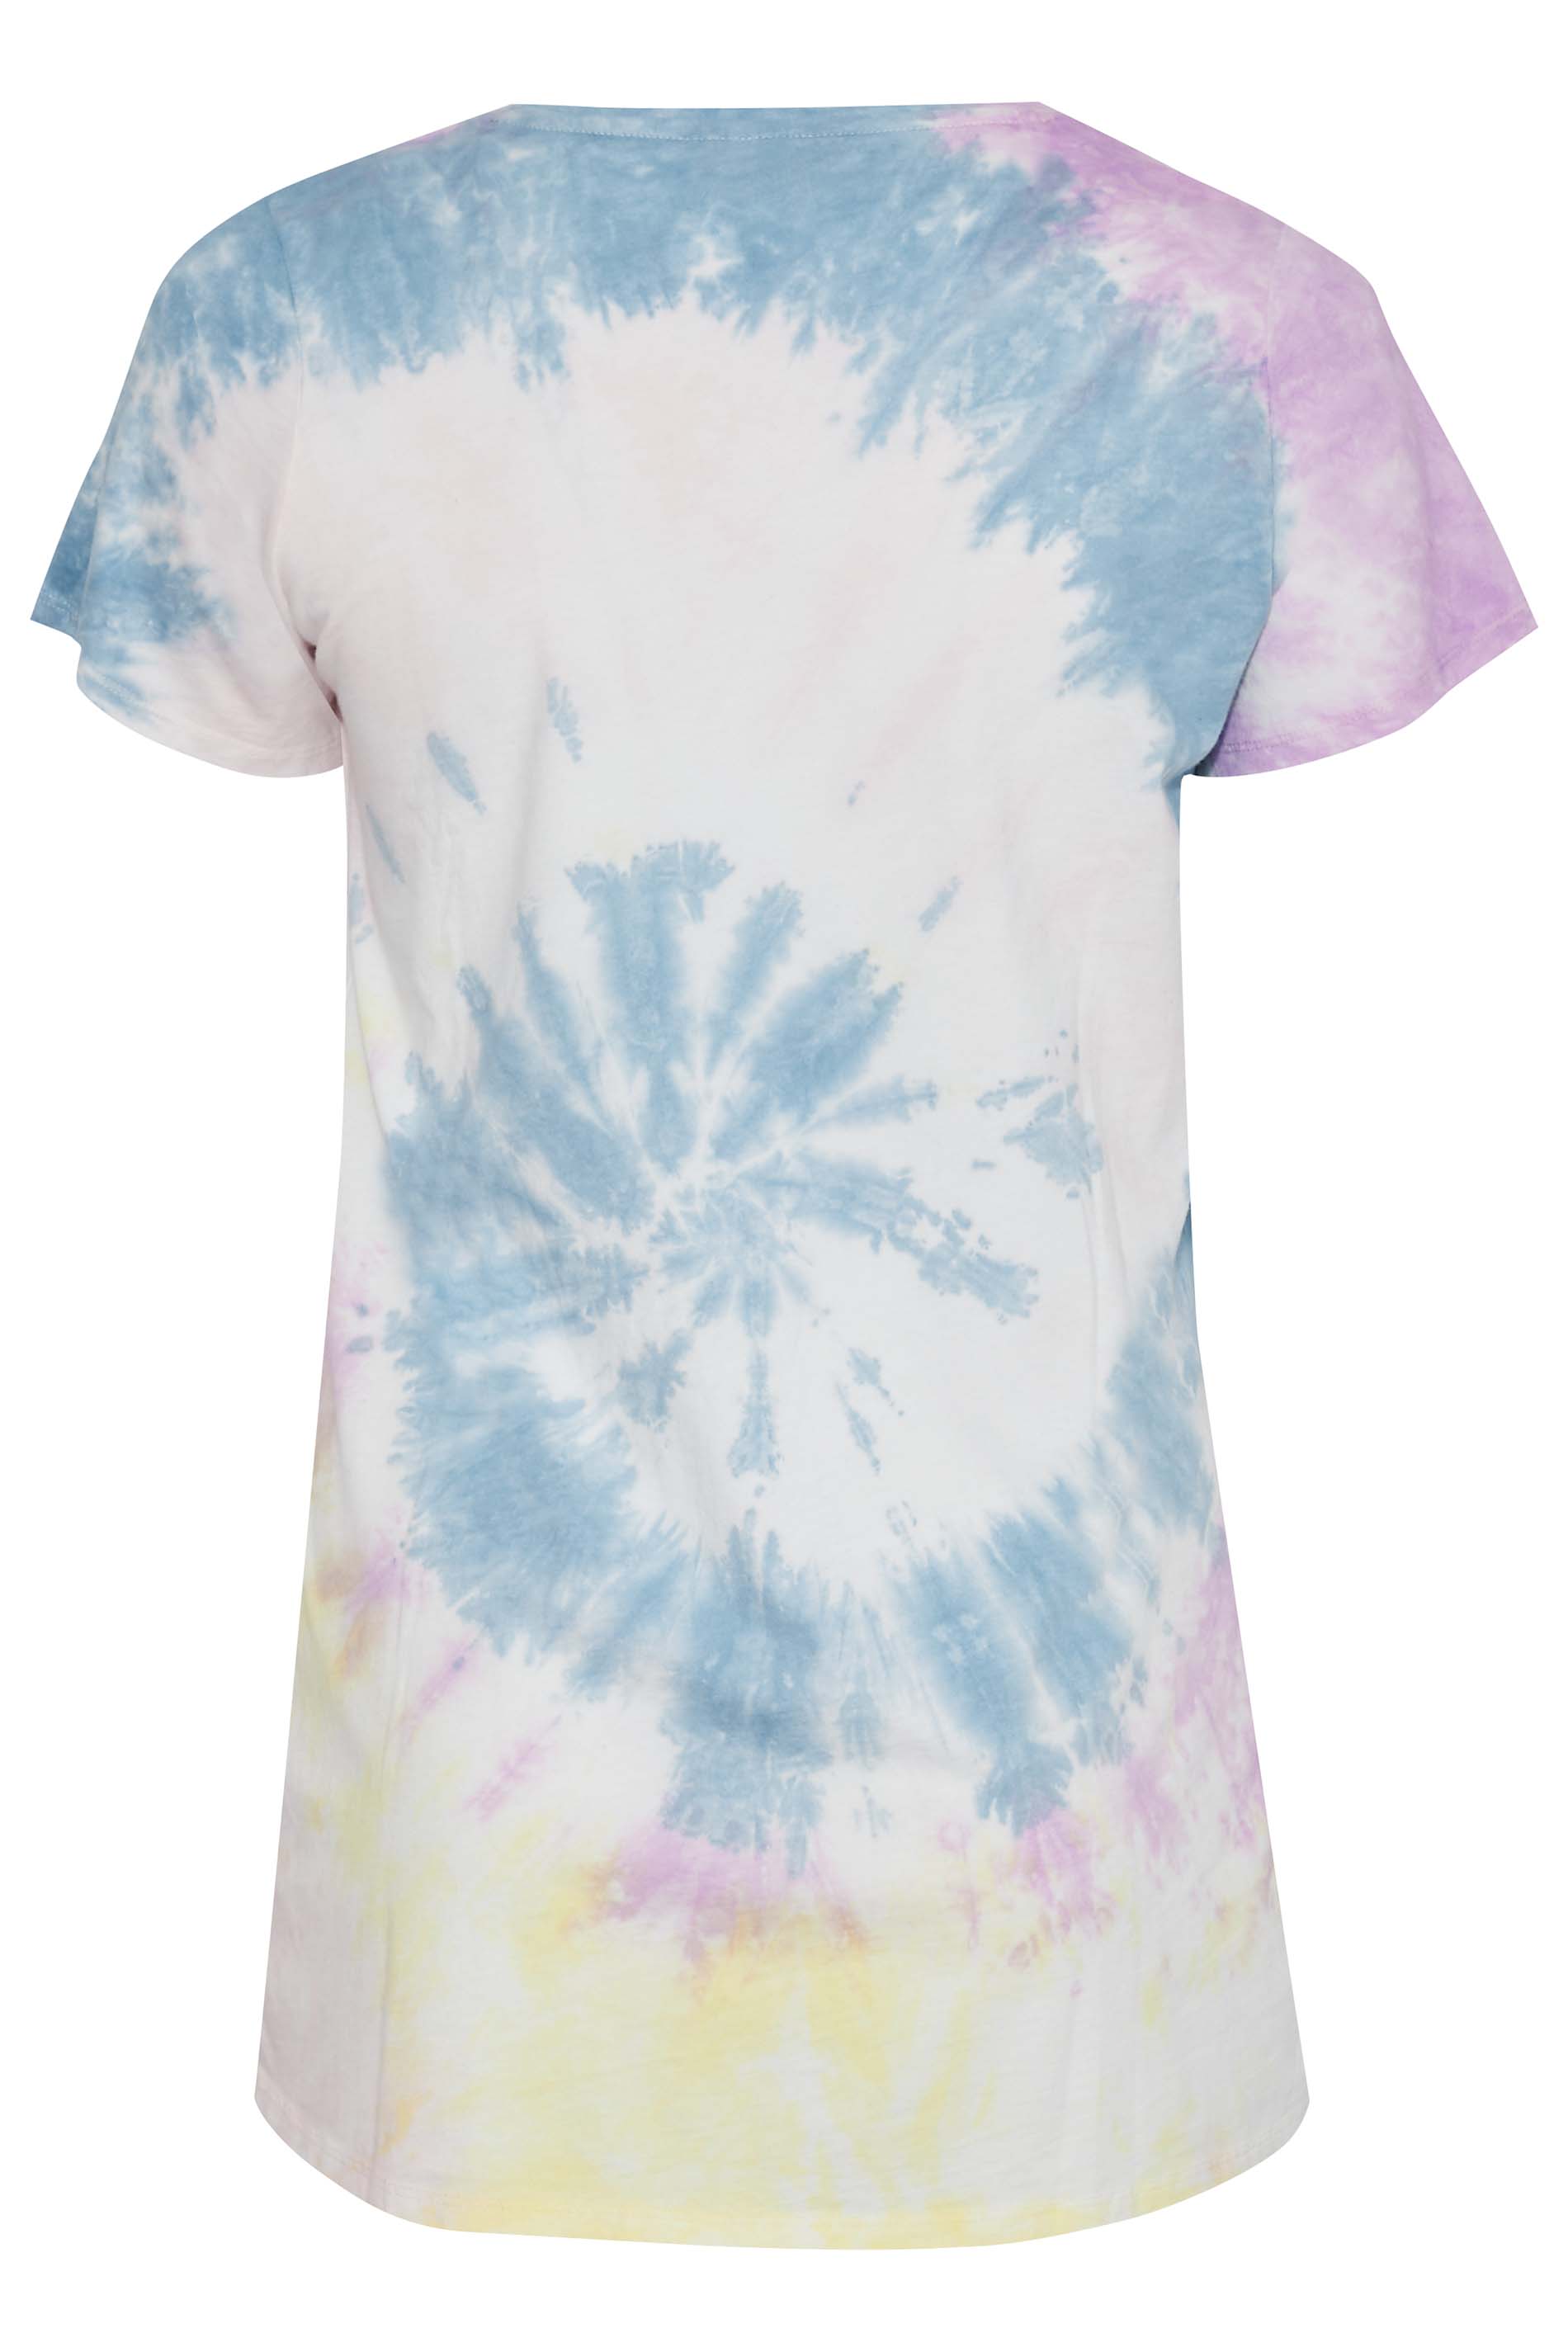 Grande taille  Tops Grande taille  T-Shirts | Curve White Tie Dye Cotton T-Shirt - NL84661